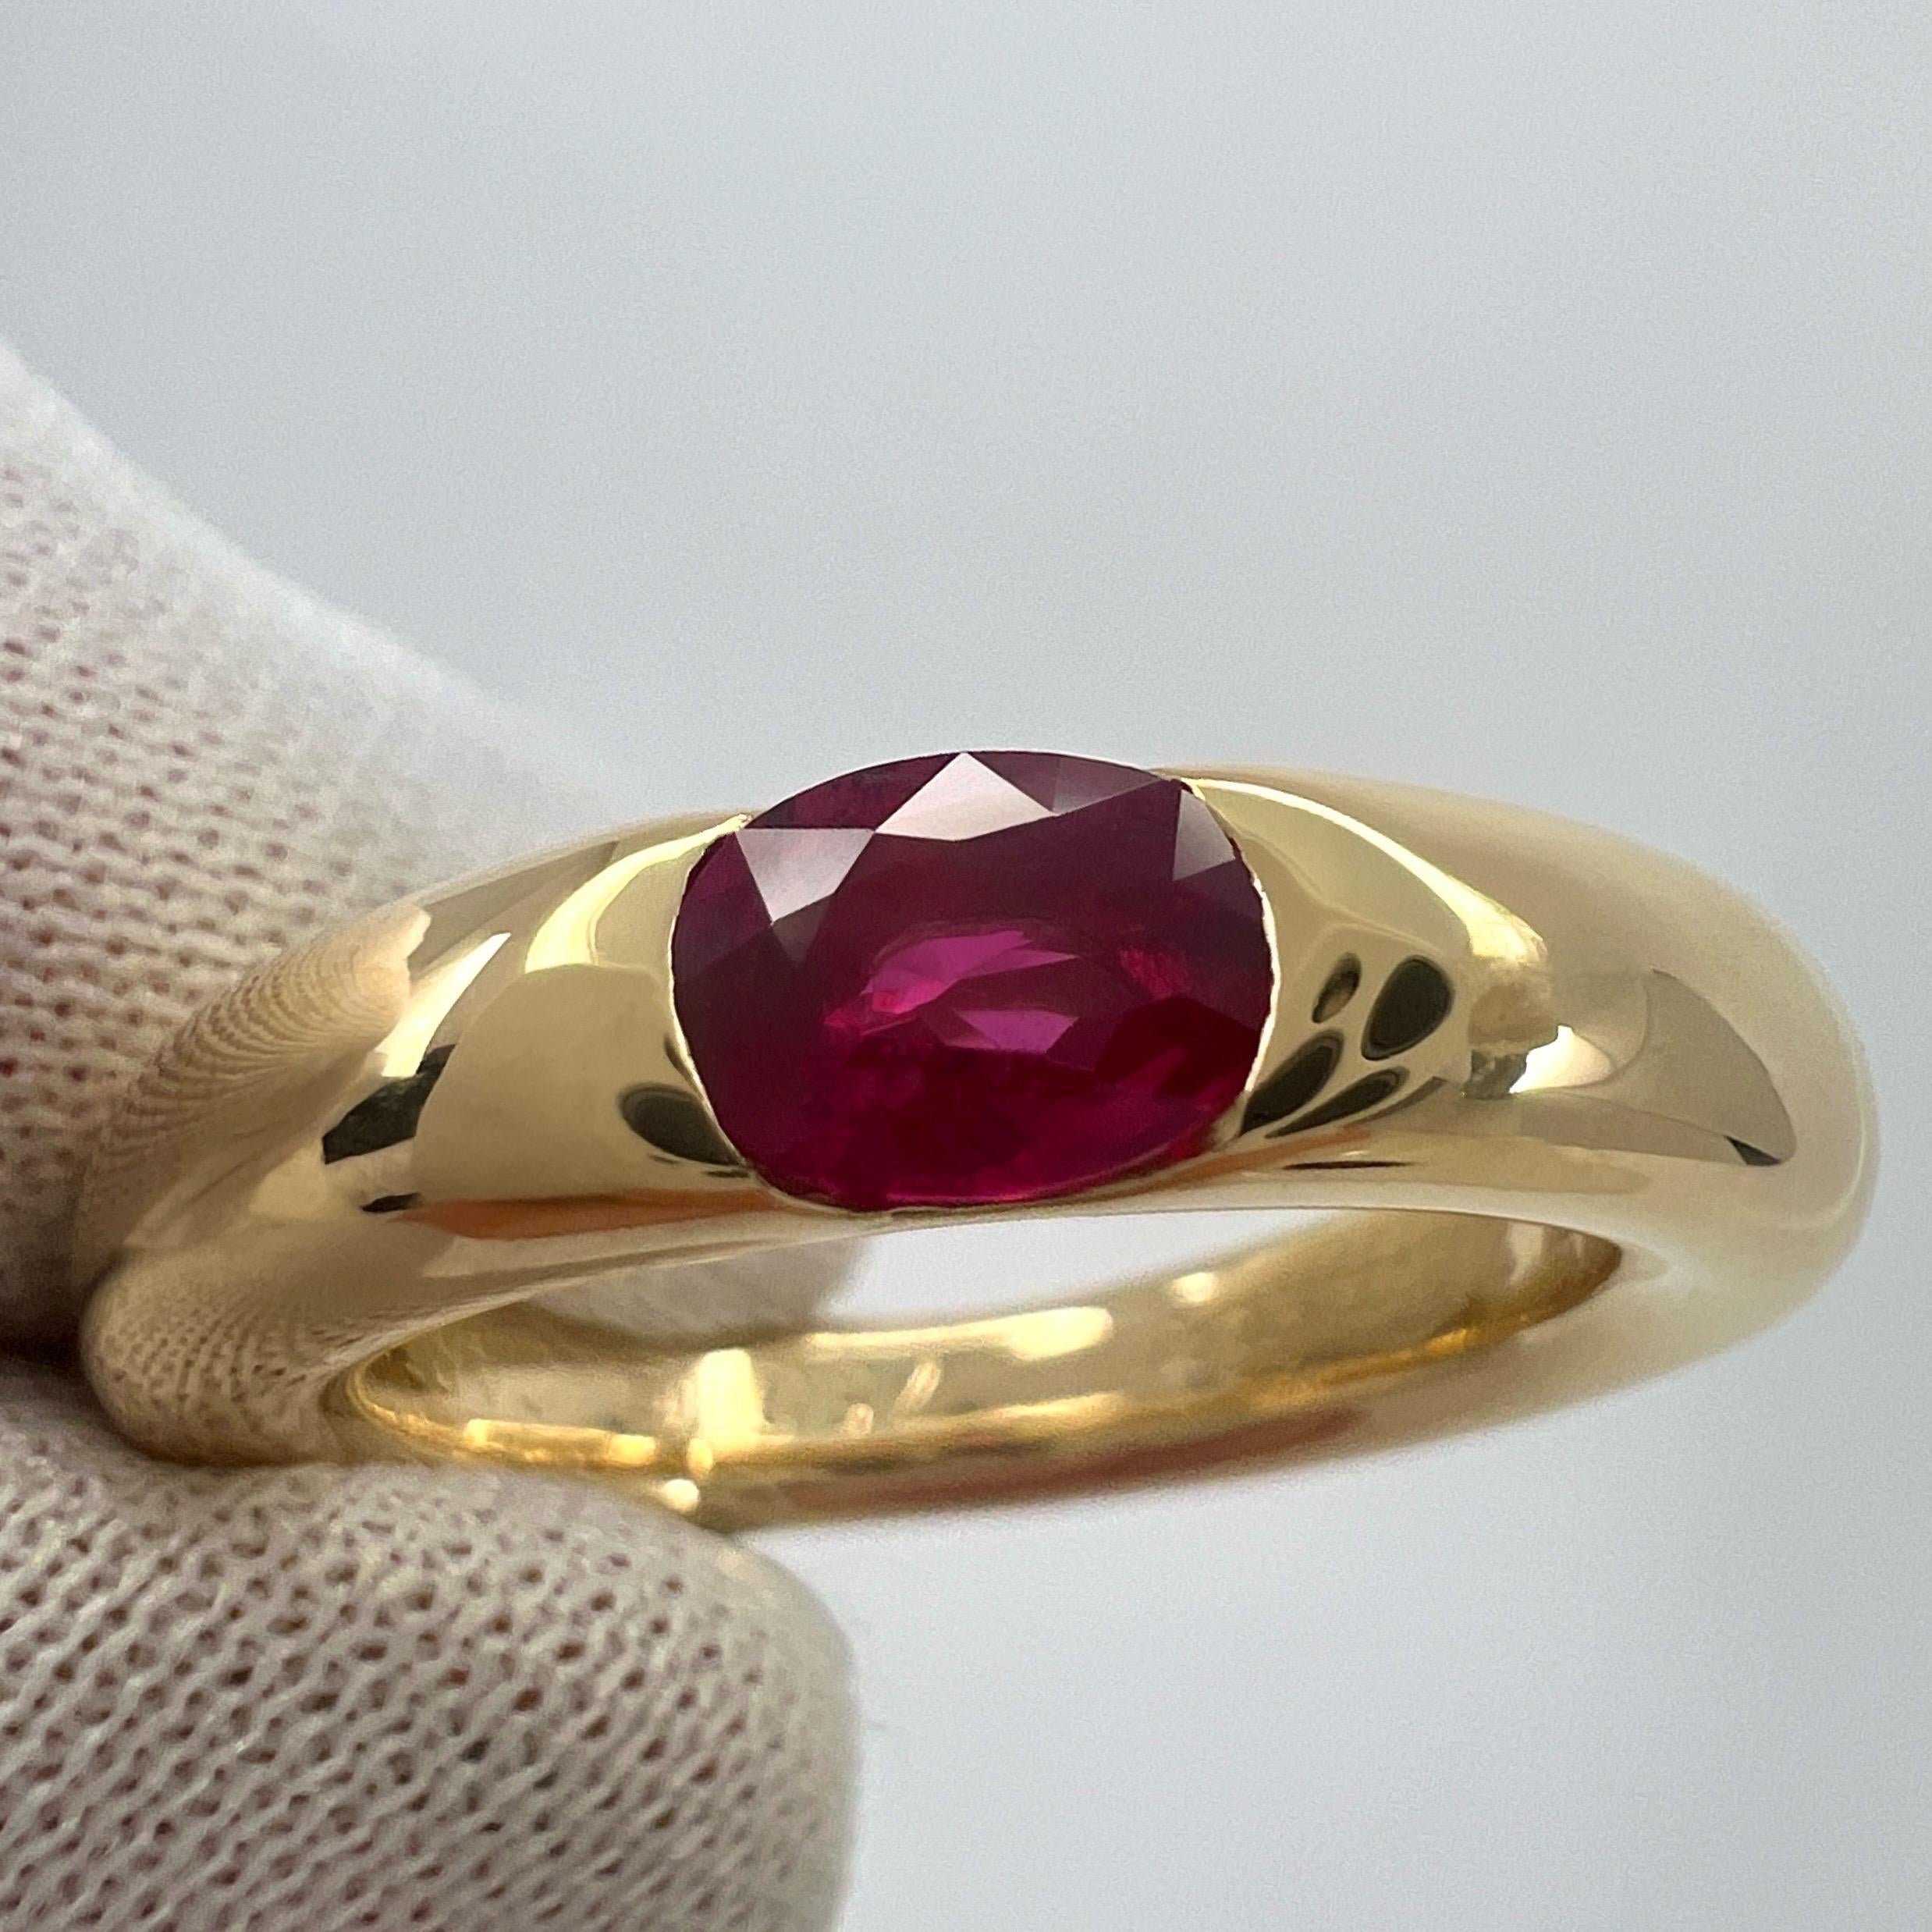 Vintage Cartier Vivid Red Ruby Ellipse 18k Gelbgold Oval Cut Solitaire Ring 4